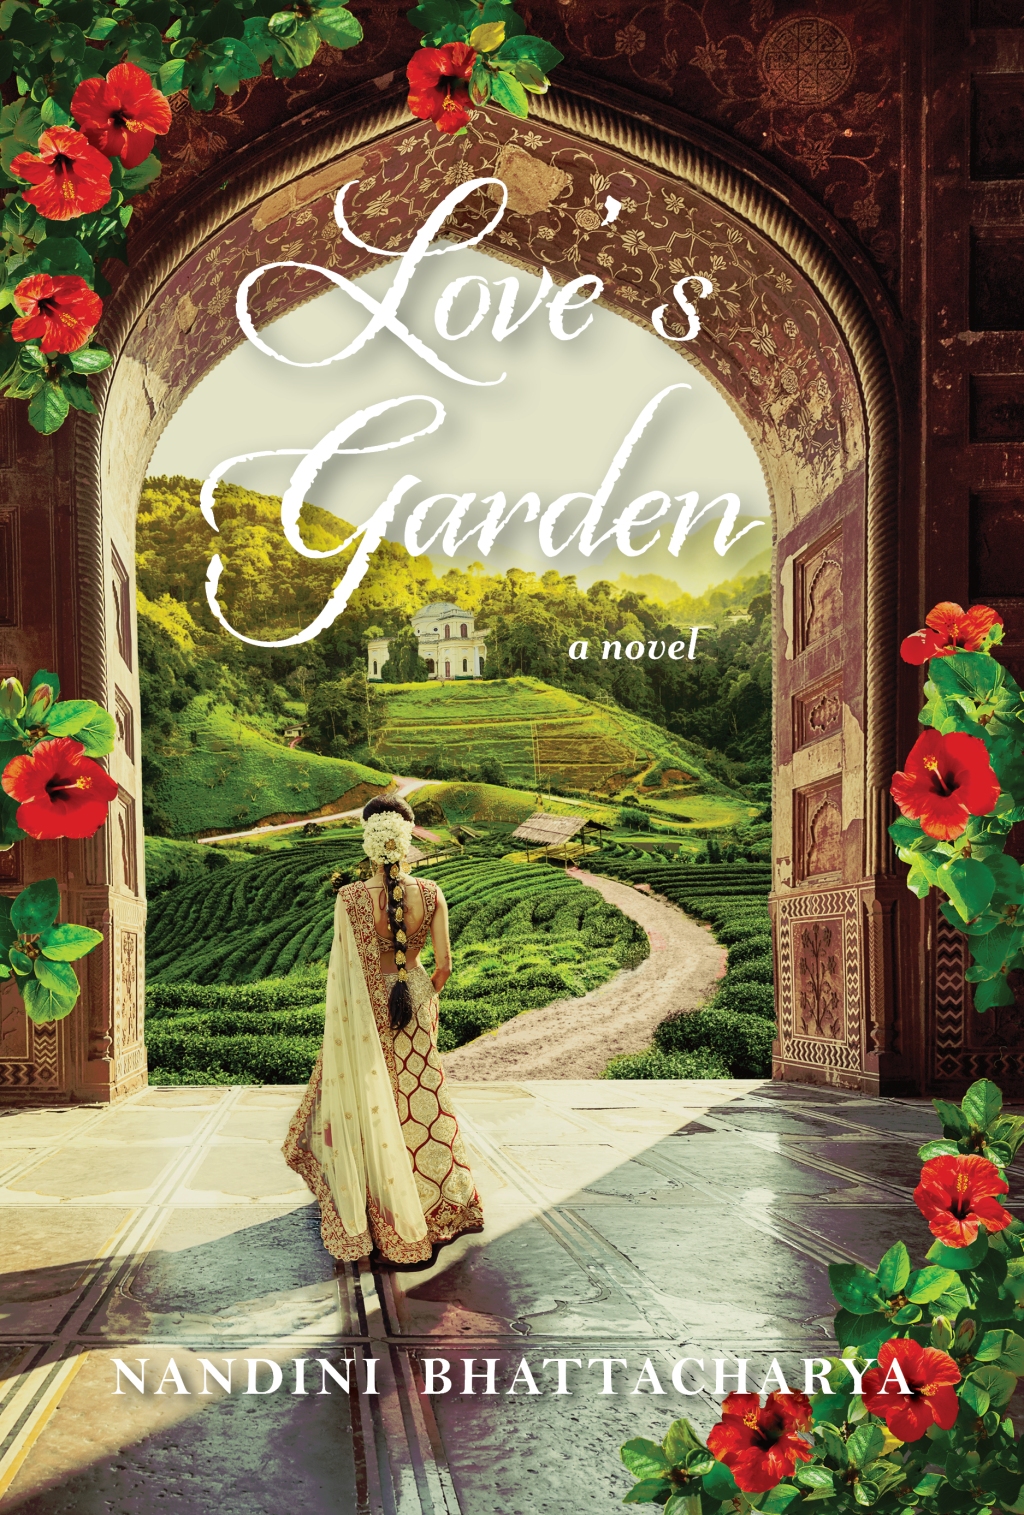 Please join me for the Launch of my novel Love’s Garden at Brazos Bookstore, Houston, TX